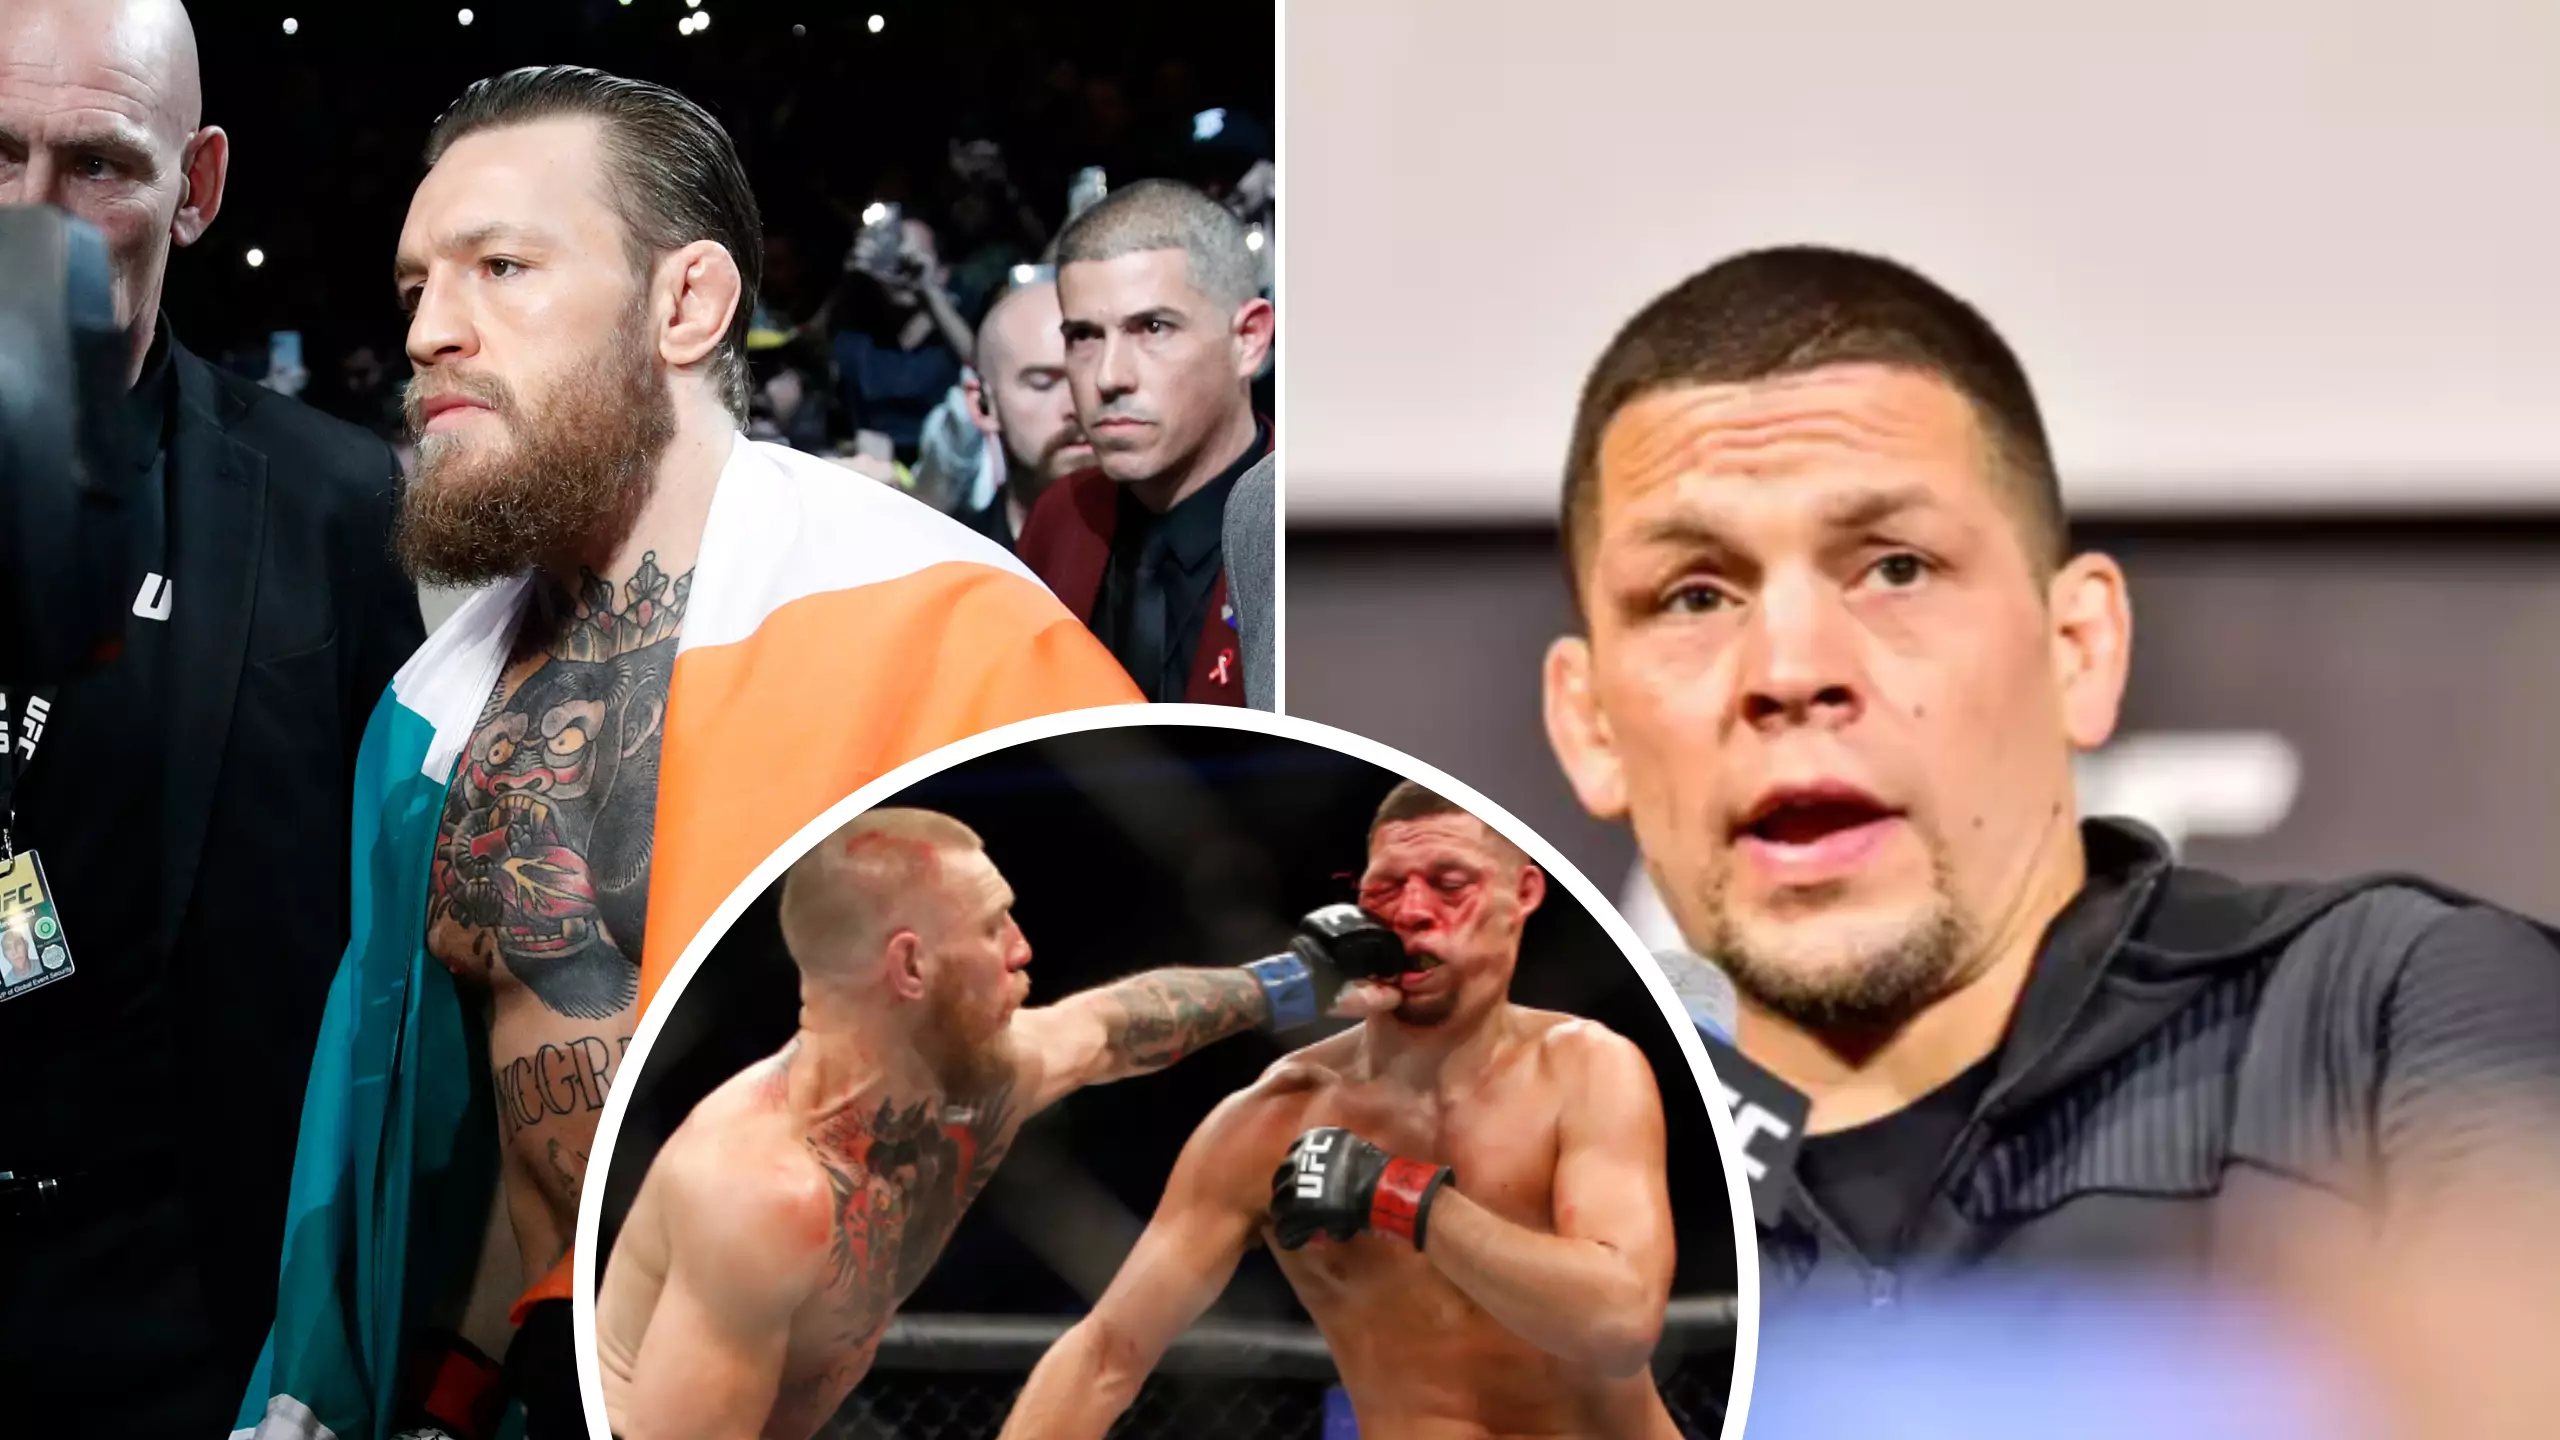 'Conor McGregor's Next Fight Will Be Nate Diaz Three'